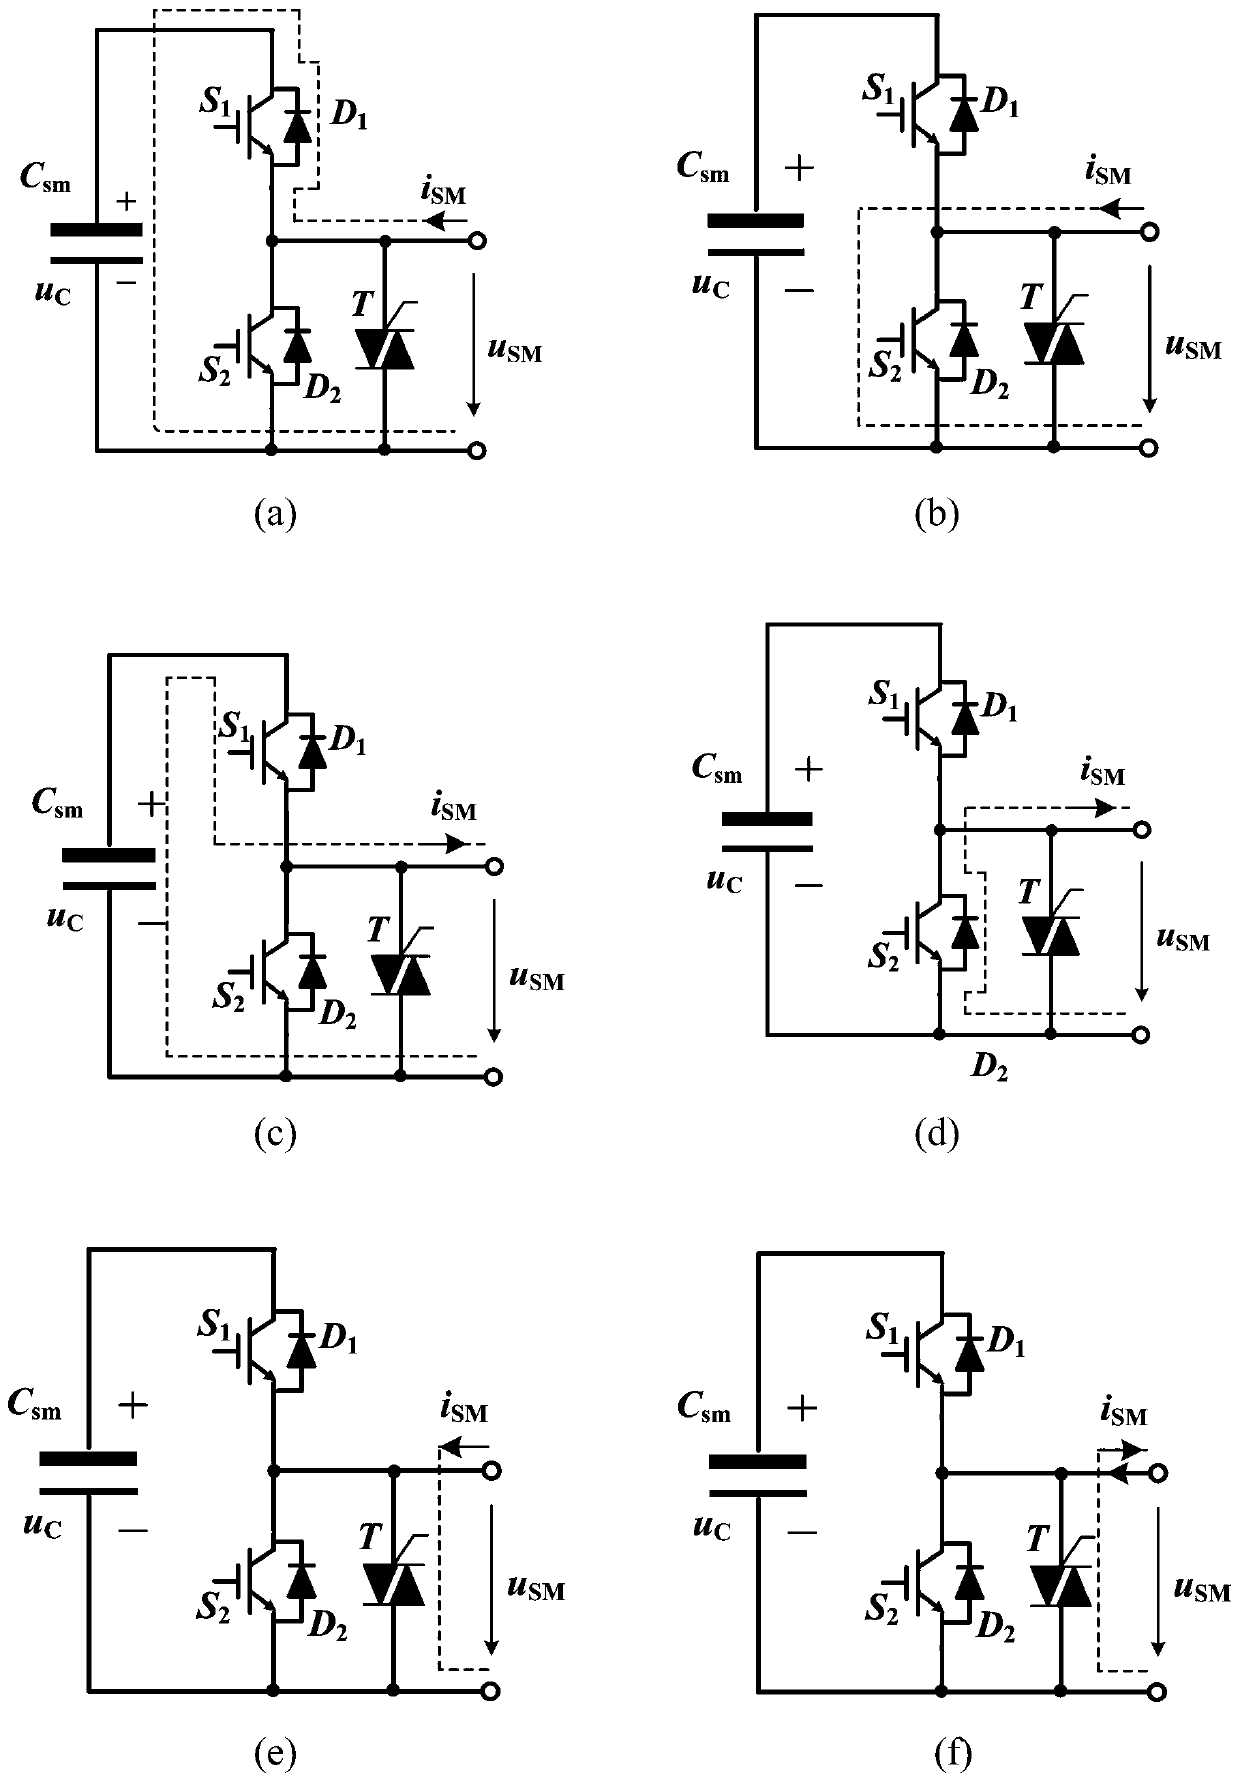 A thermal shock suppression control method for mmc single-phase AC ground fault based on active bypass